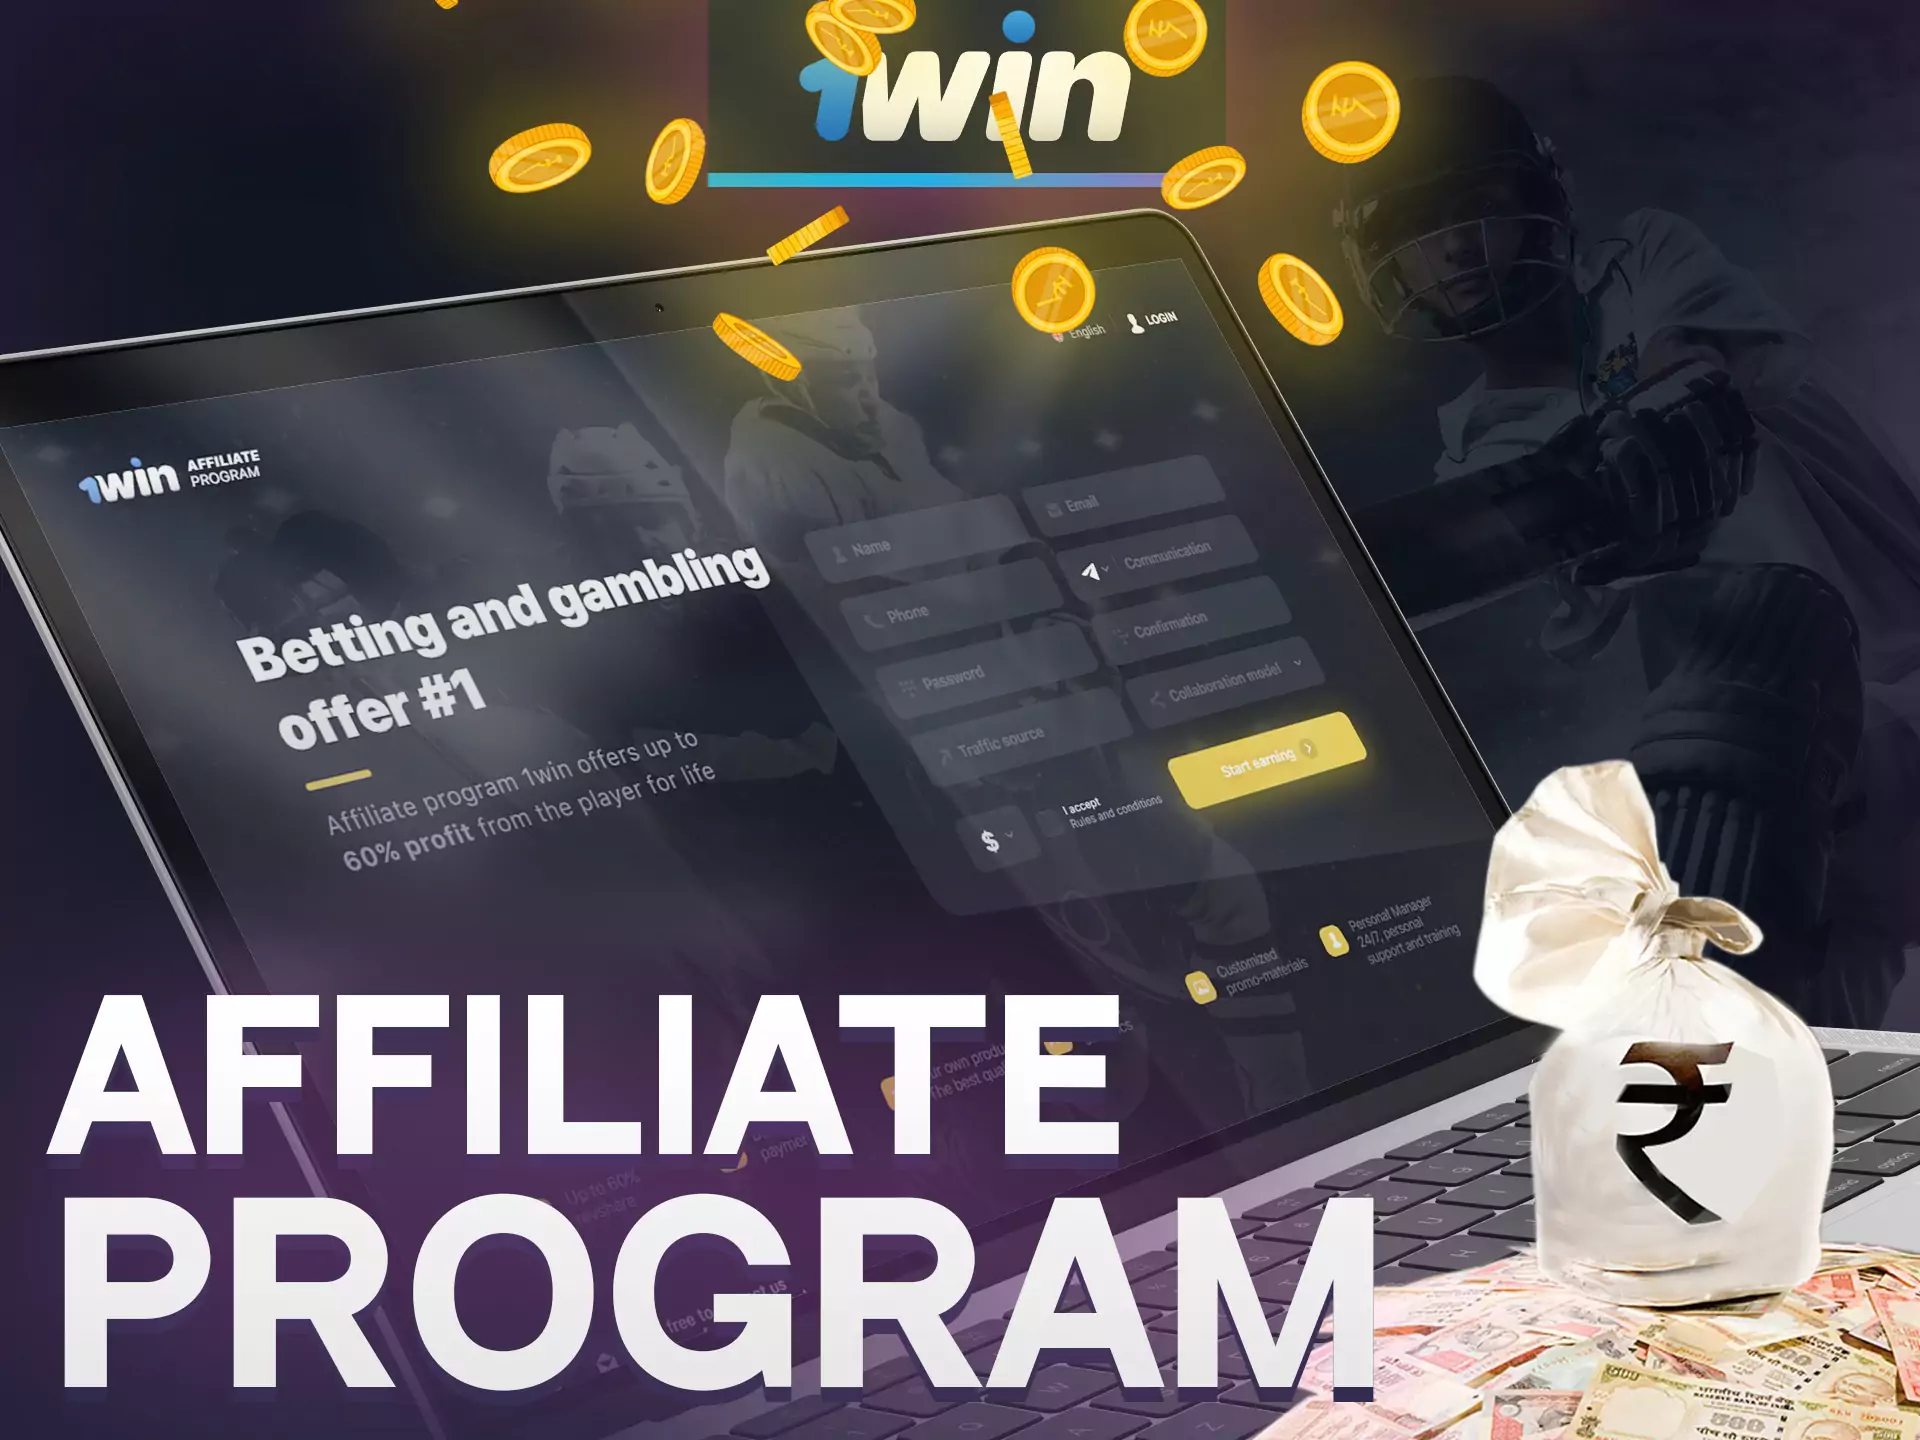 Members of the 1win affiliate program get additional profit from inviting friends to the betting platform and online casino.